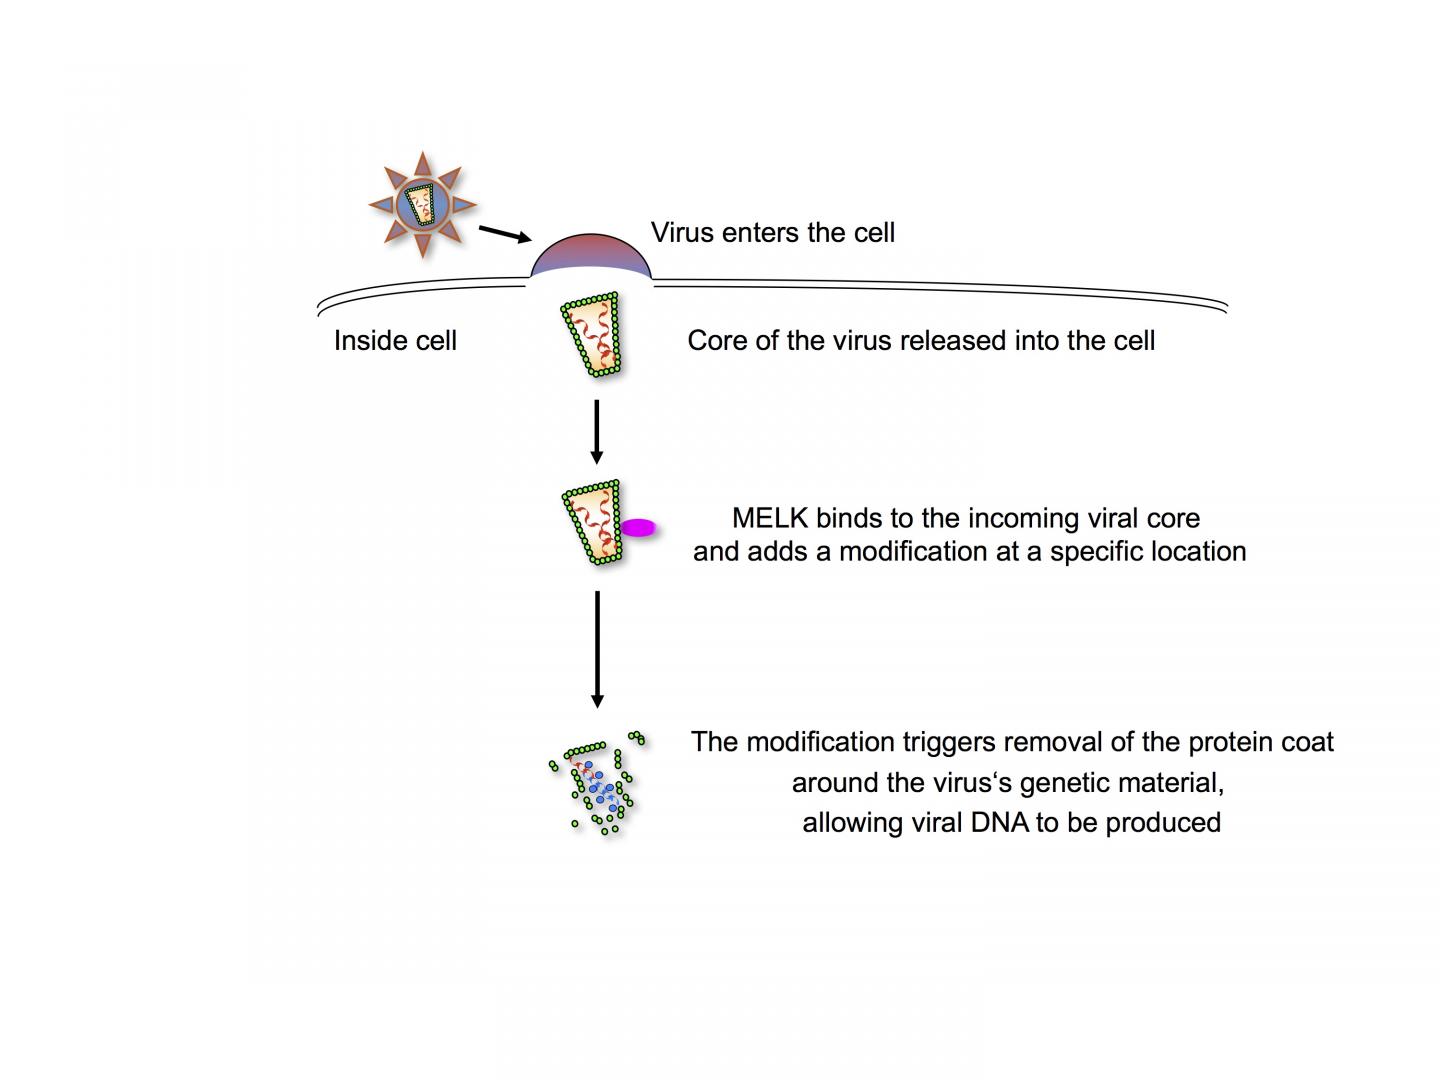 Modification of the Viral Protein Coat by MELK Regulates its Removal to Allow Viral DNA Synthesis